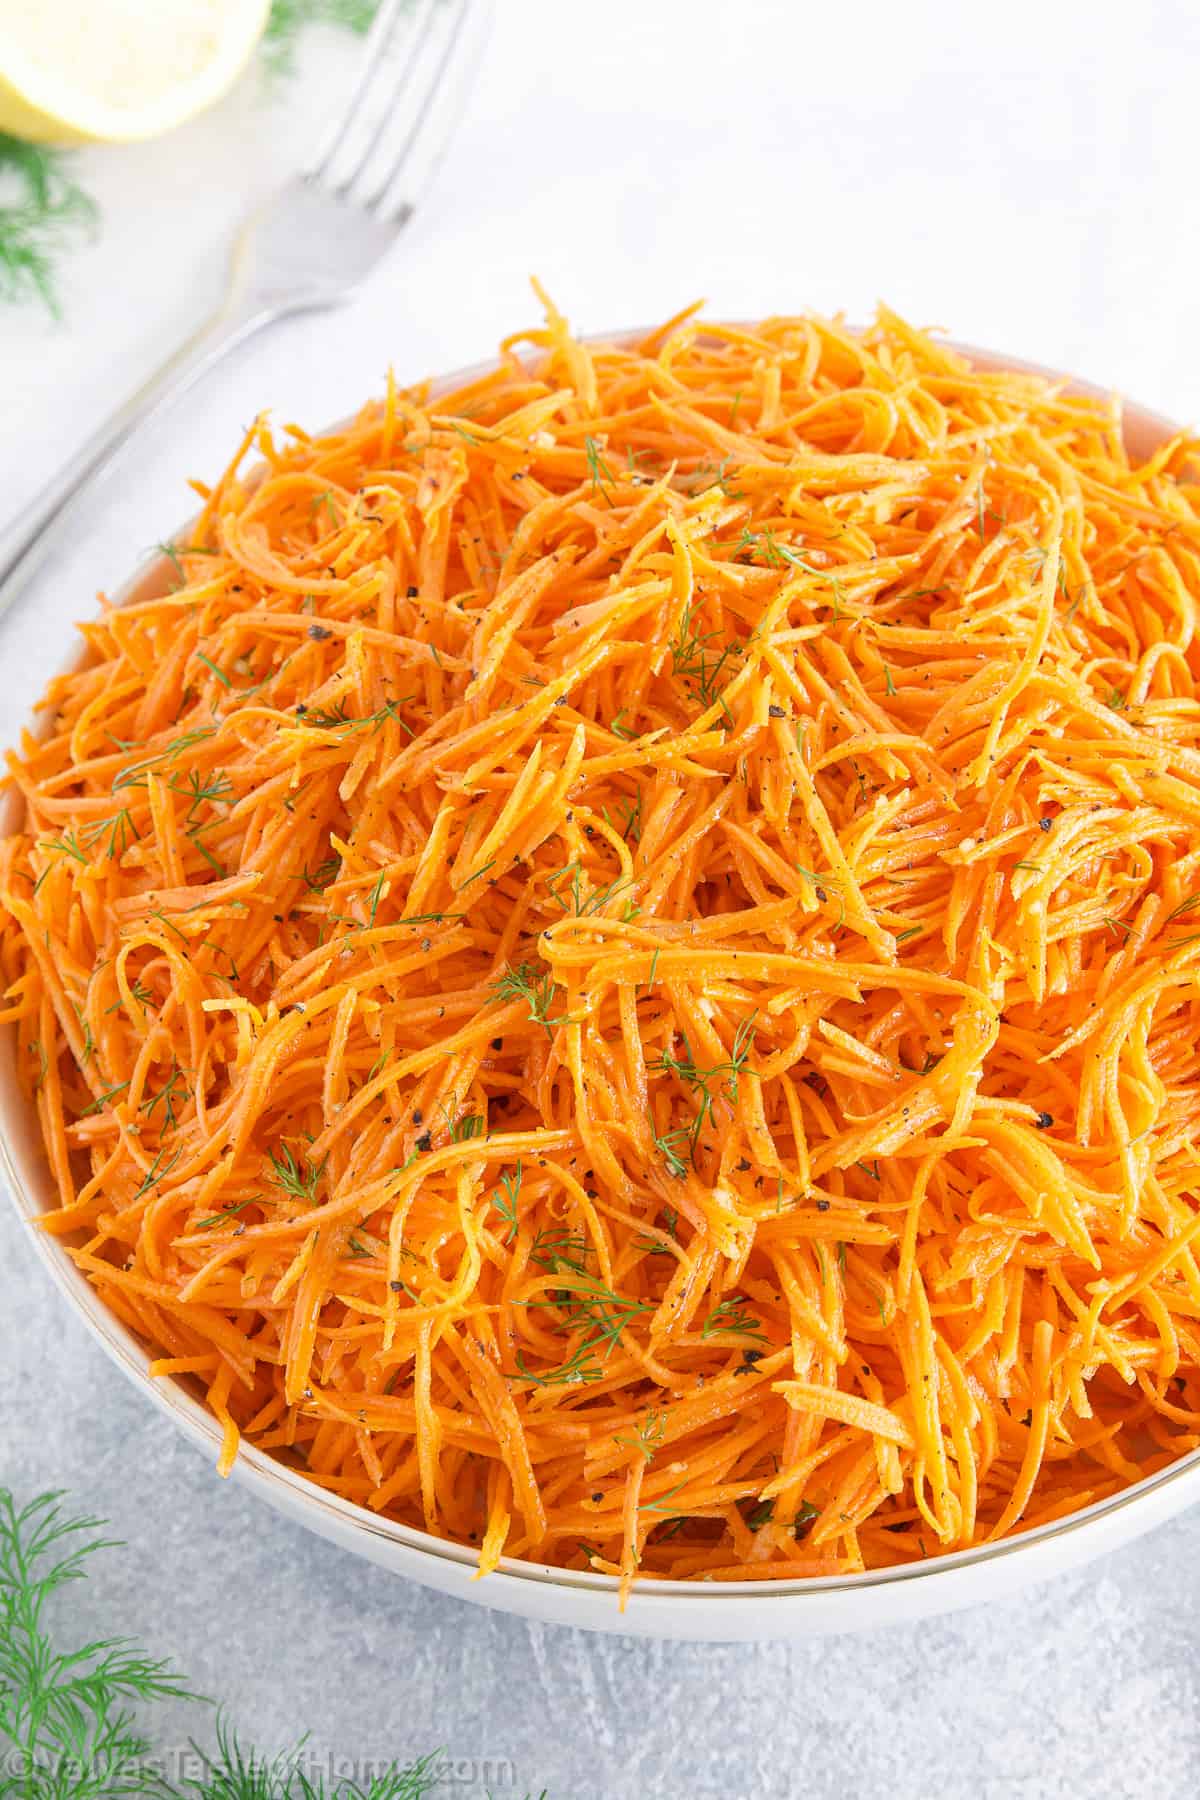 This salad is a delightful mix of fresh ingredients such as julienne carrots, garlic cloves, spices, and lemon juice or rice vinegar tossed together in a large bowl. 